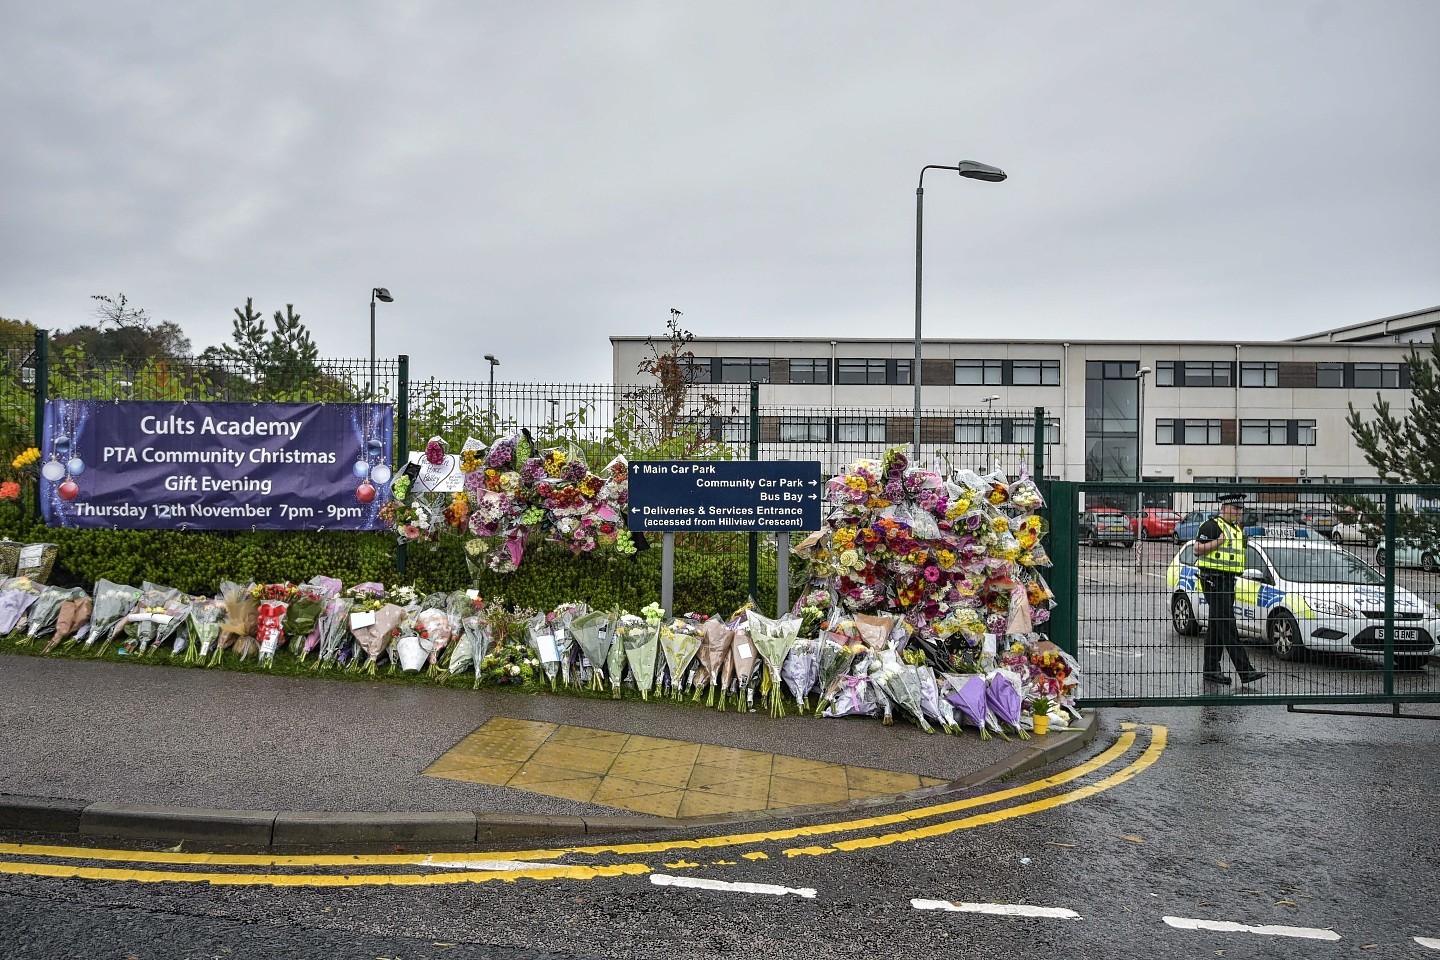 The number of floral tributes continues to grow